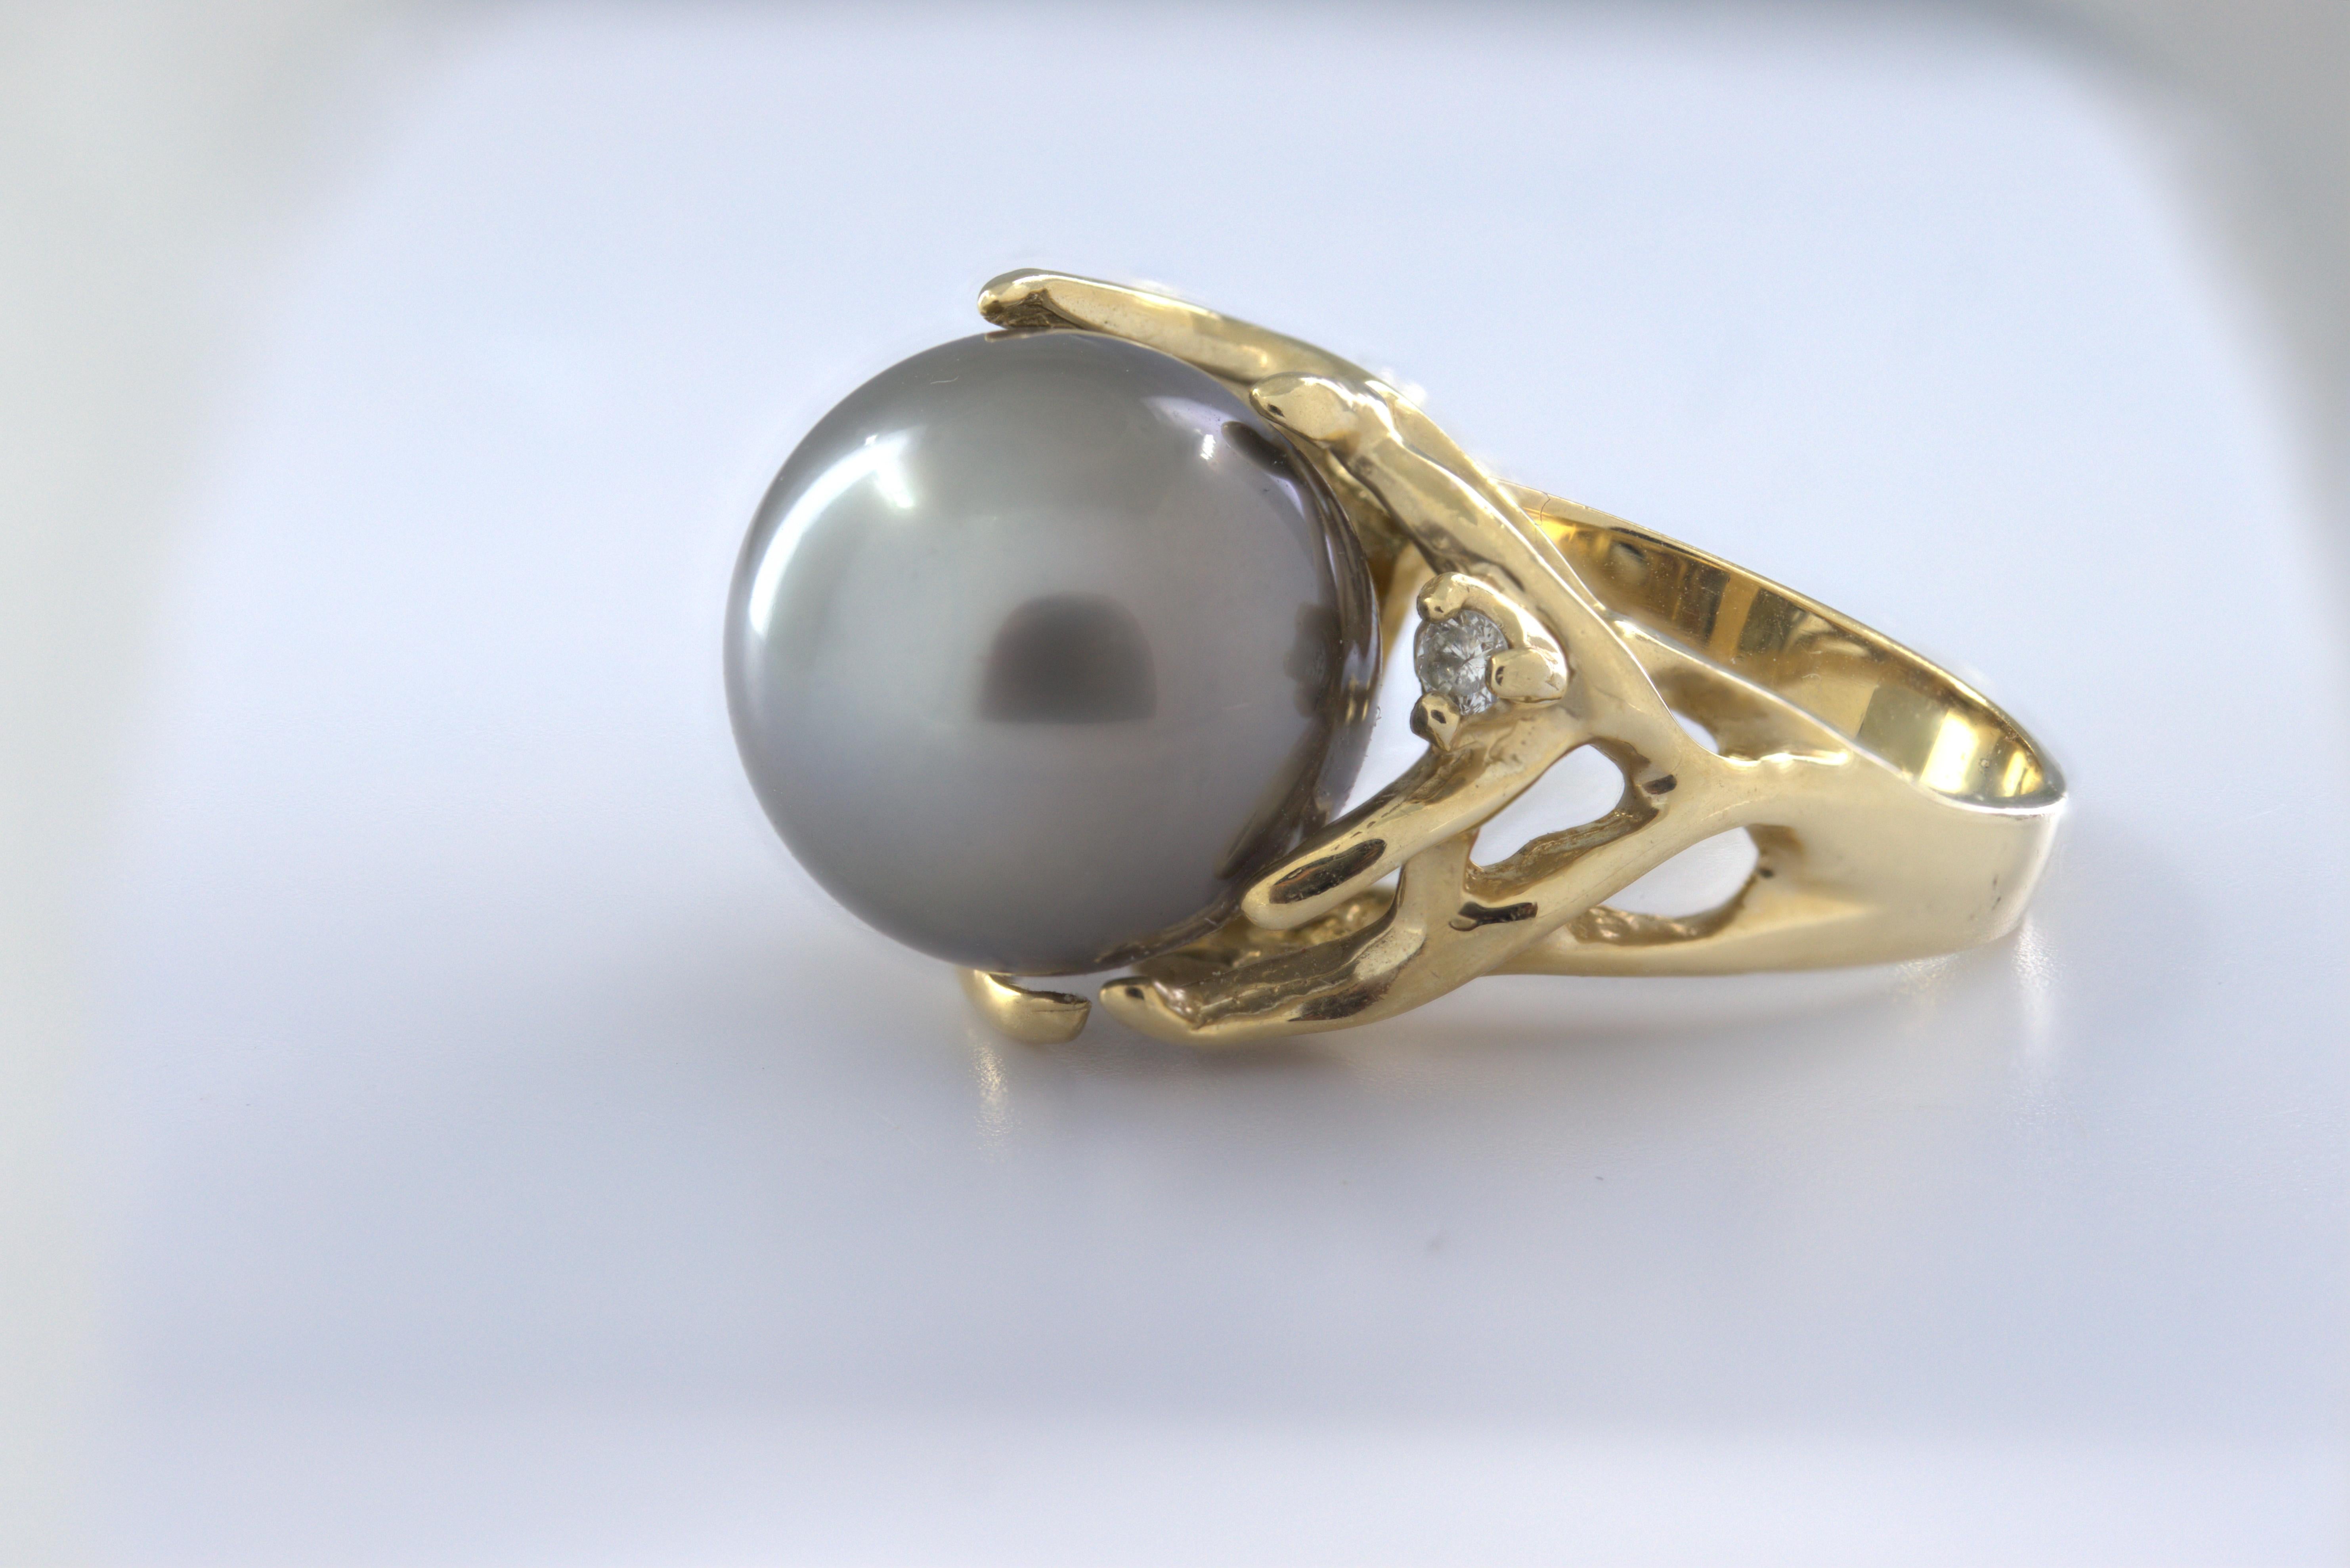 Featuring (1) 12.7 mm gray Tahitian cultured pearl, accented by (1) full-cut diamond, 0.03 ct., I, J, set in an asymmetric, 14k yellow gold tendril form mounting, 14.6 mm tapering to 2.8 mm, size 8, Gross weight 8.58 grams.